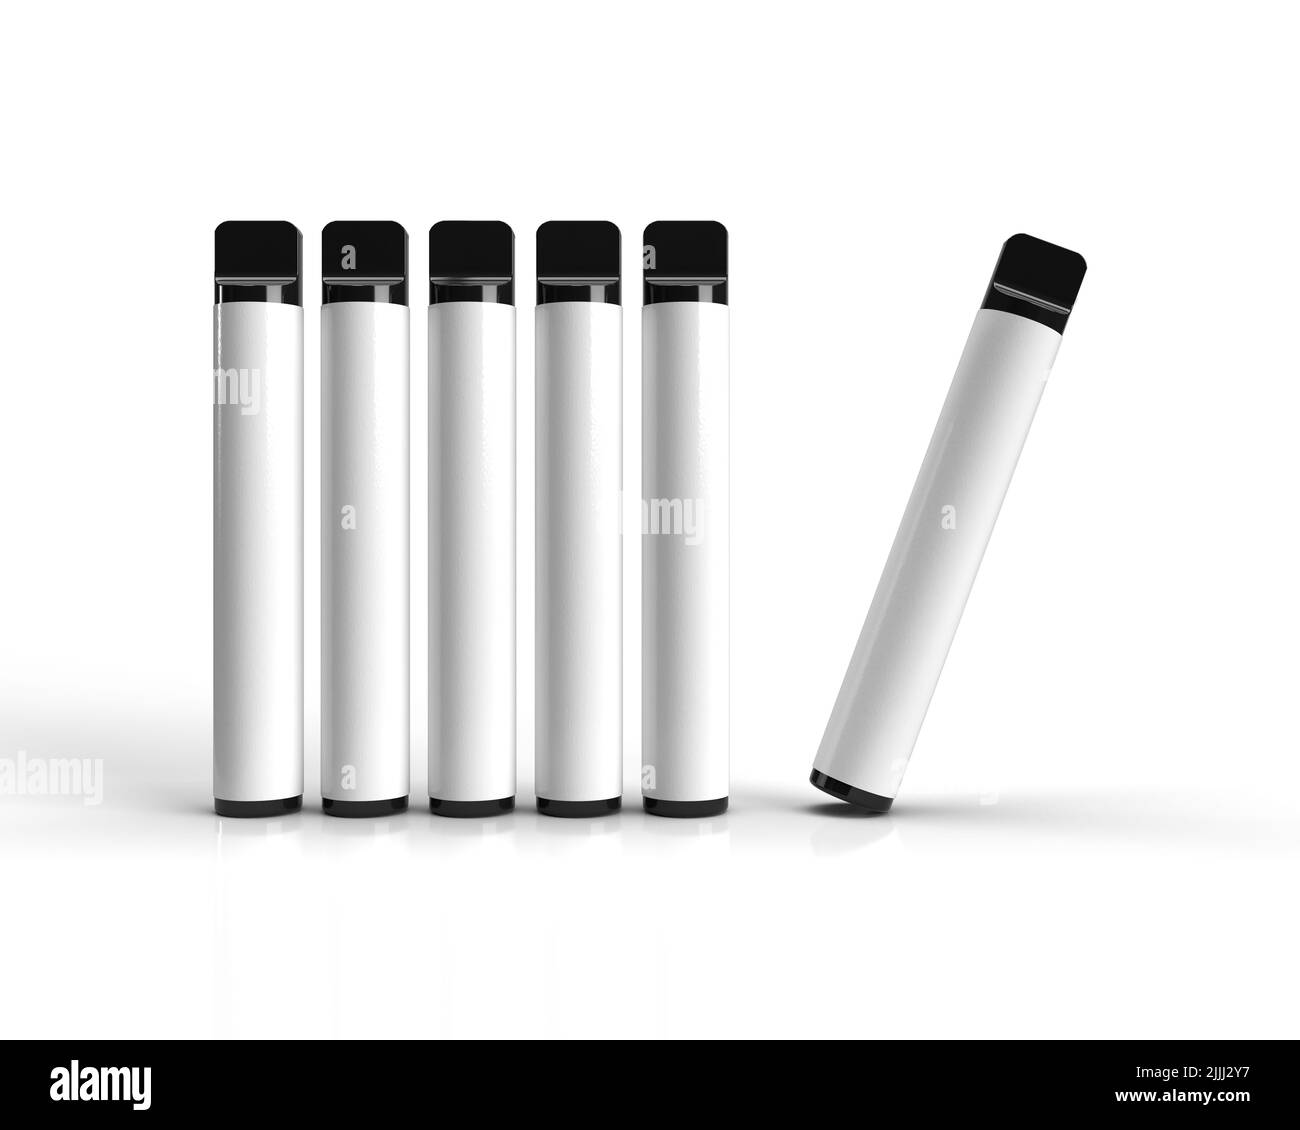 Disposable Vapes standing in line and one tilted over, with brandable white label ideal for mockups. 3D render illustration. Stock Photo